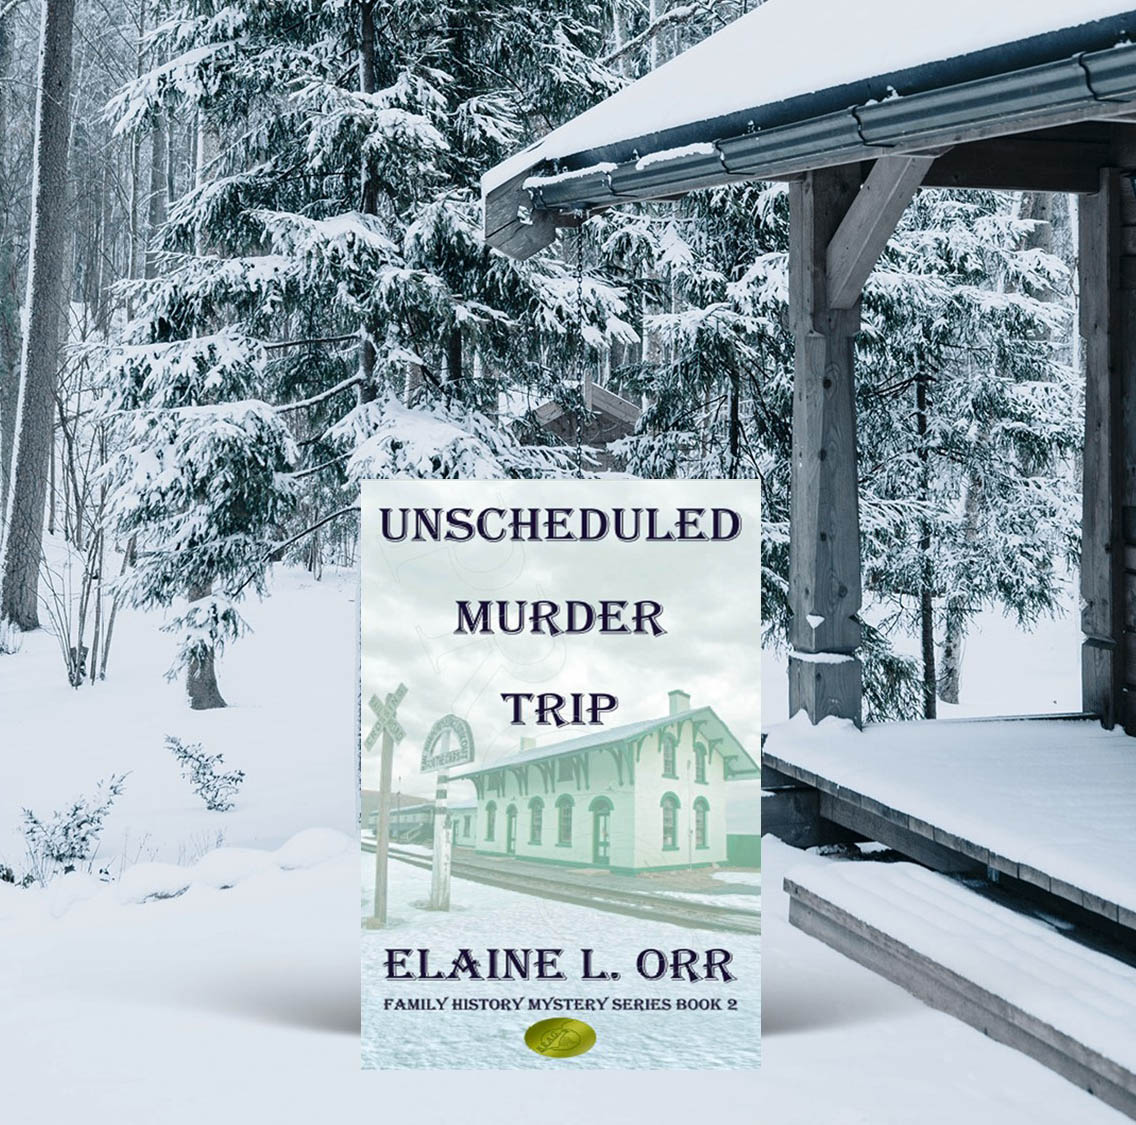 A man disappeared in a snowstorm the day JFK died. Who doesn’t want Digger to find out why – & will kill to keep the secret #cozymystery
amzn.to/2M42jDW
Google bit.ly/369CWI3
Nook bit.ly/3ontrLs
ibooks apple.co/39kxp3c
Kobo bit.ly/3sYYUY3